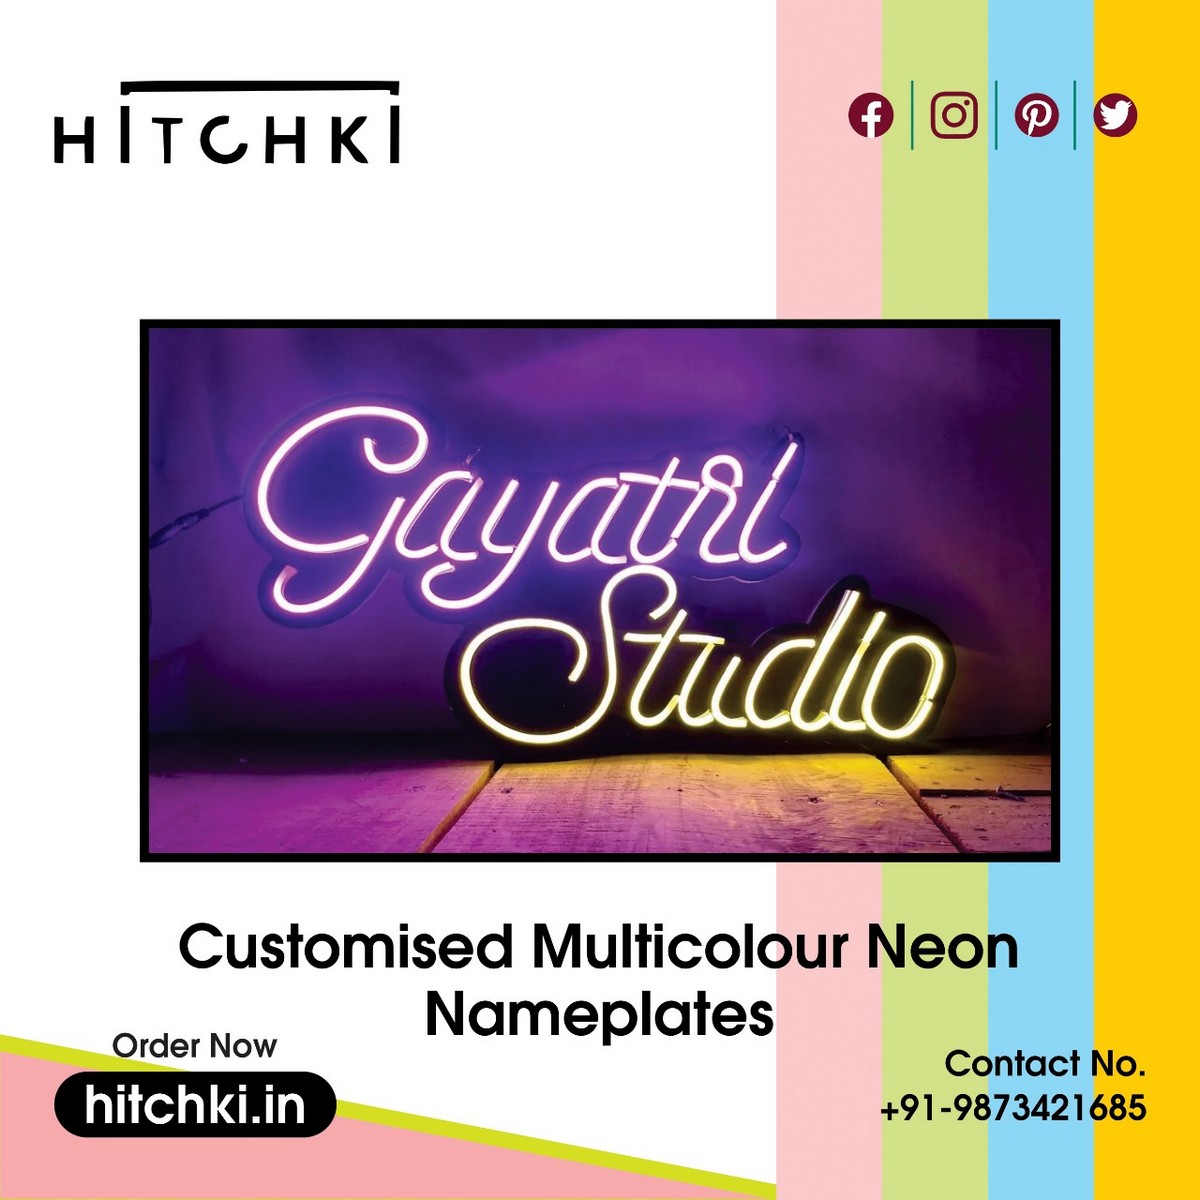 Customized Multicolour Neon Nameplates For Office House Name Plates 